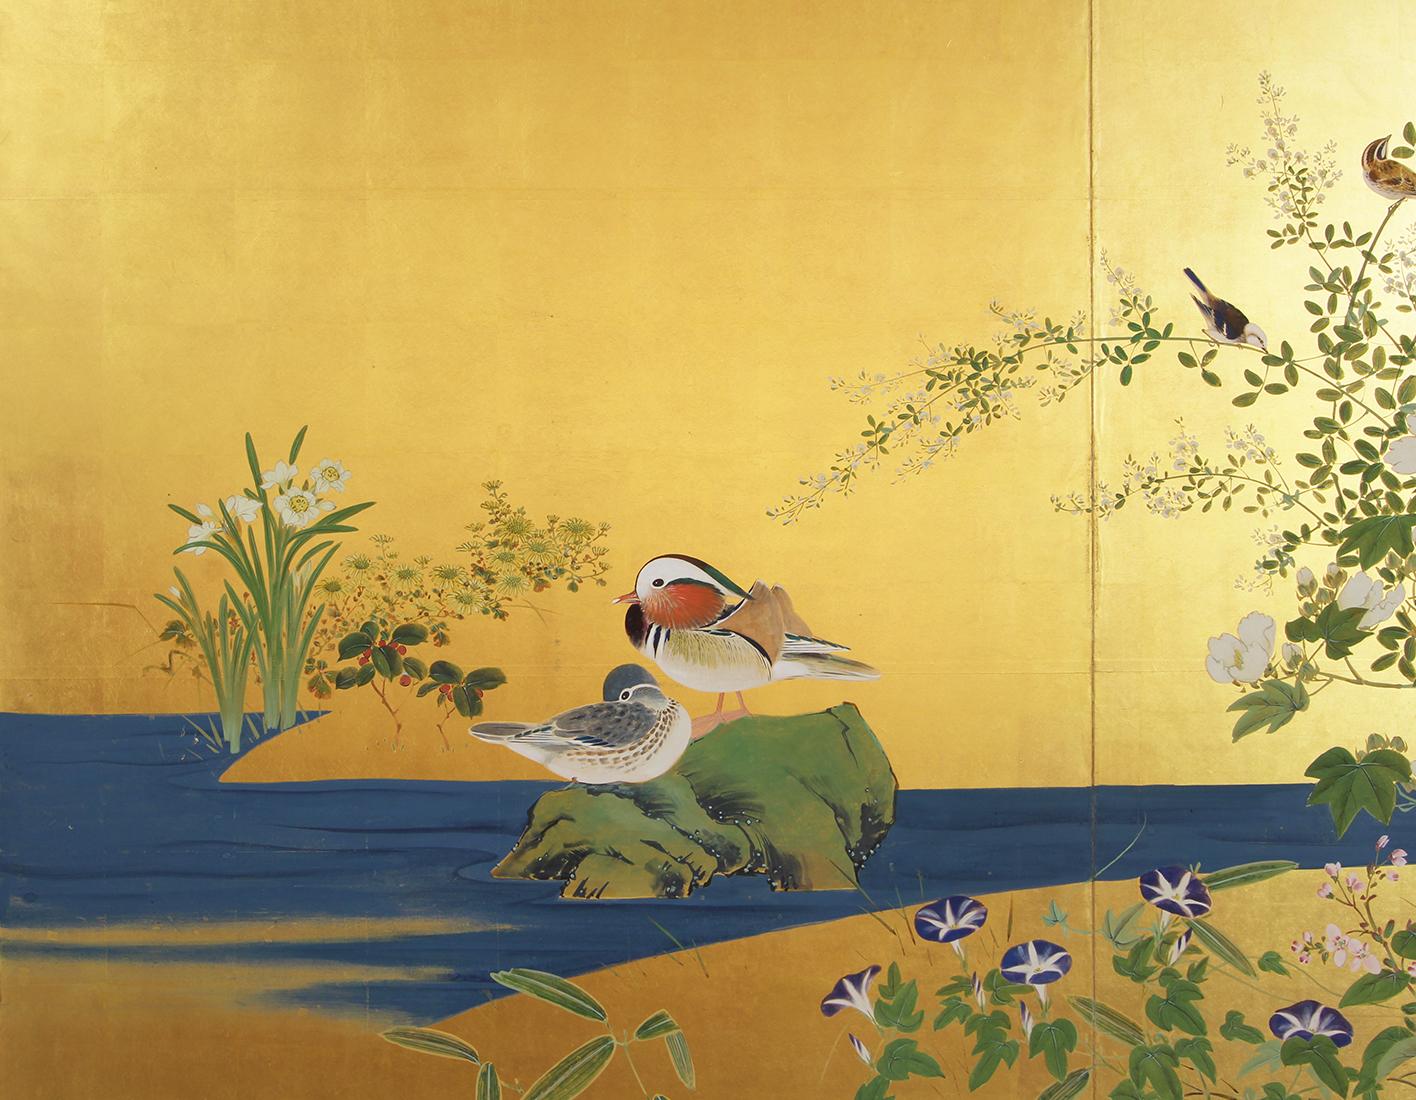 It is a two-panel screen from the Taisho period, around 1920, beautifully painted in excellent detail.
The best of Rinpa's school painting: large empty space that highlights a pair of mandarin ducks in the middle of the pond.
On the right, flying